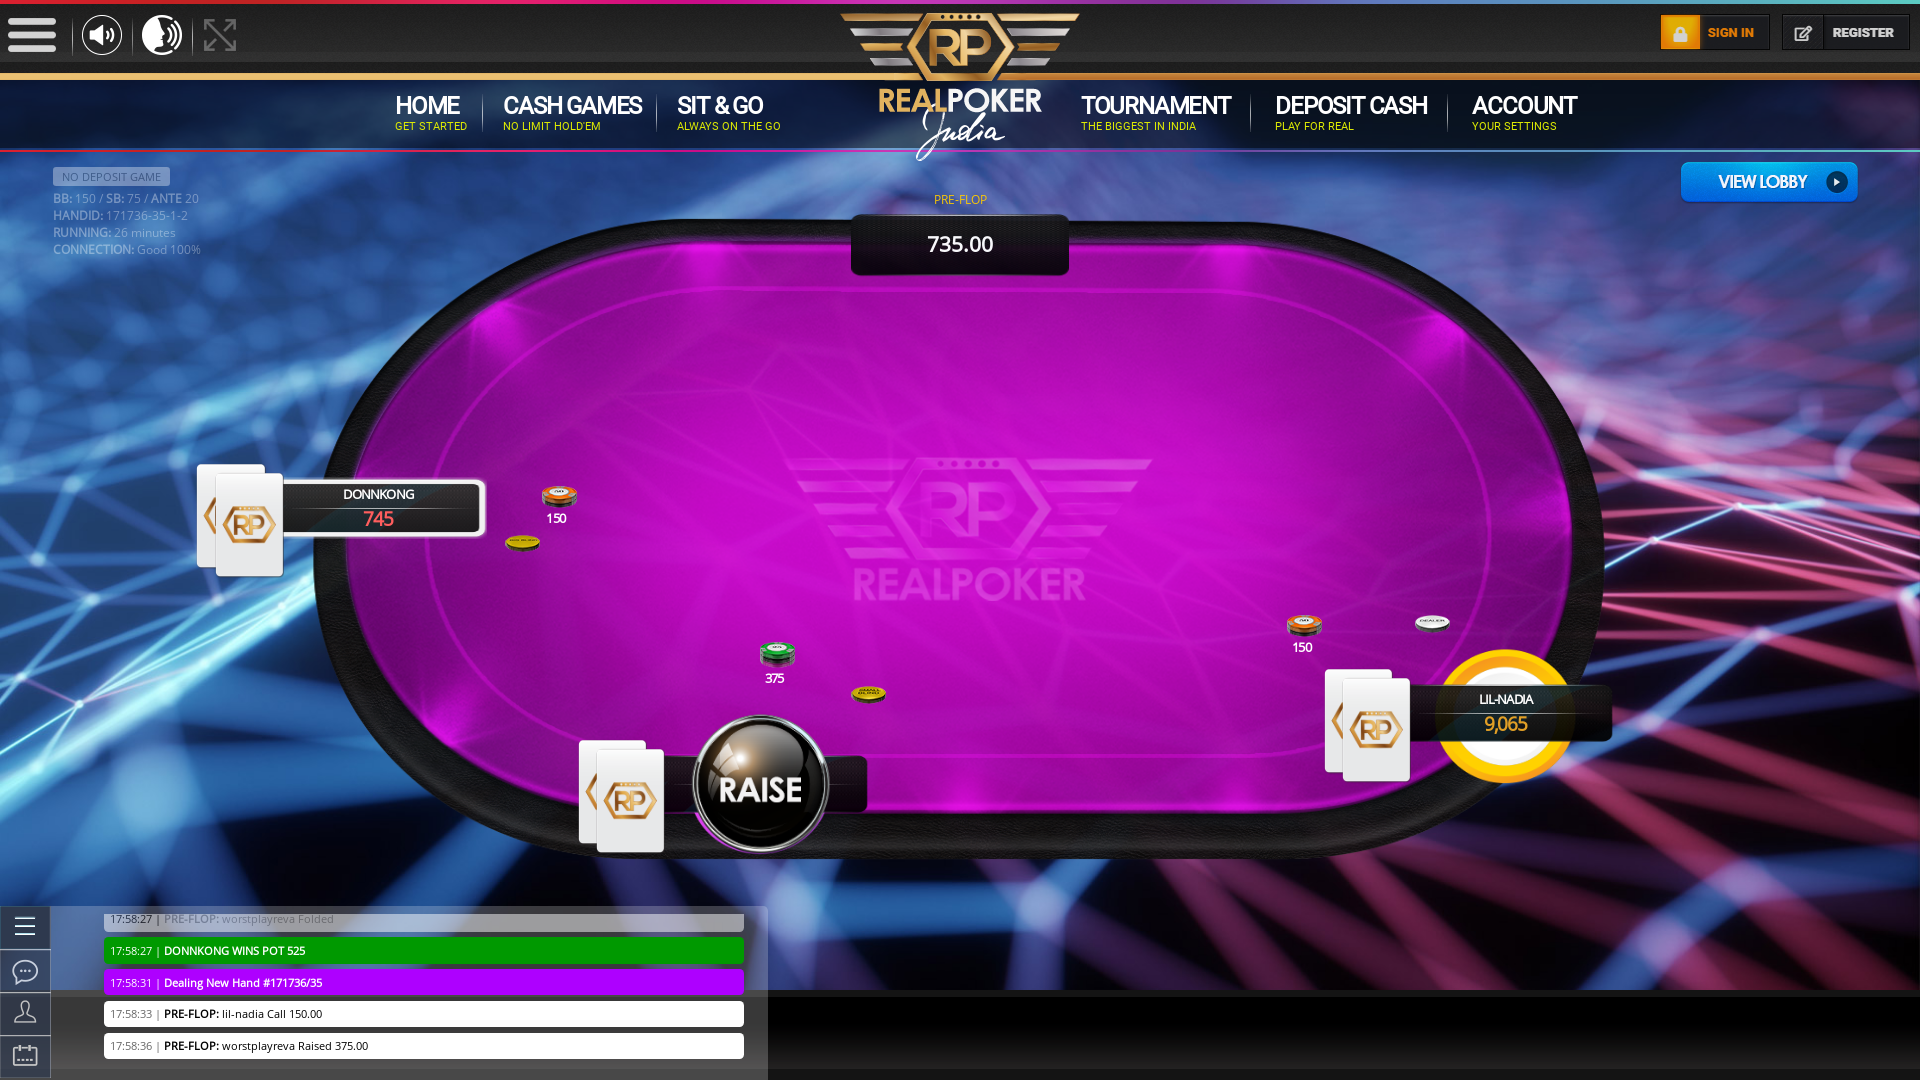 Real poker 10 player table in the 26th minute